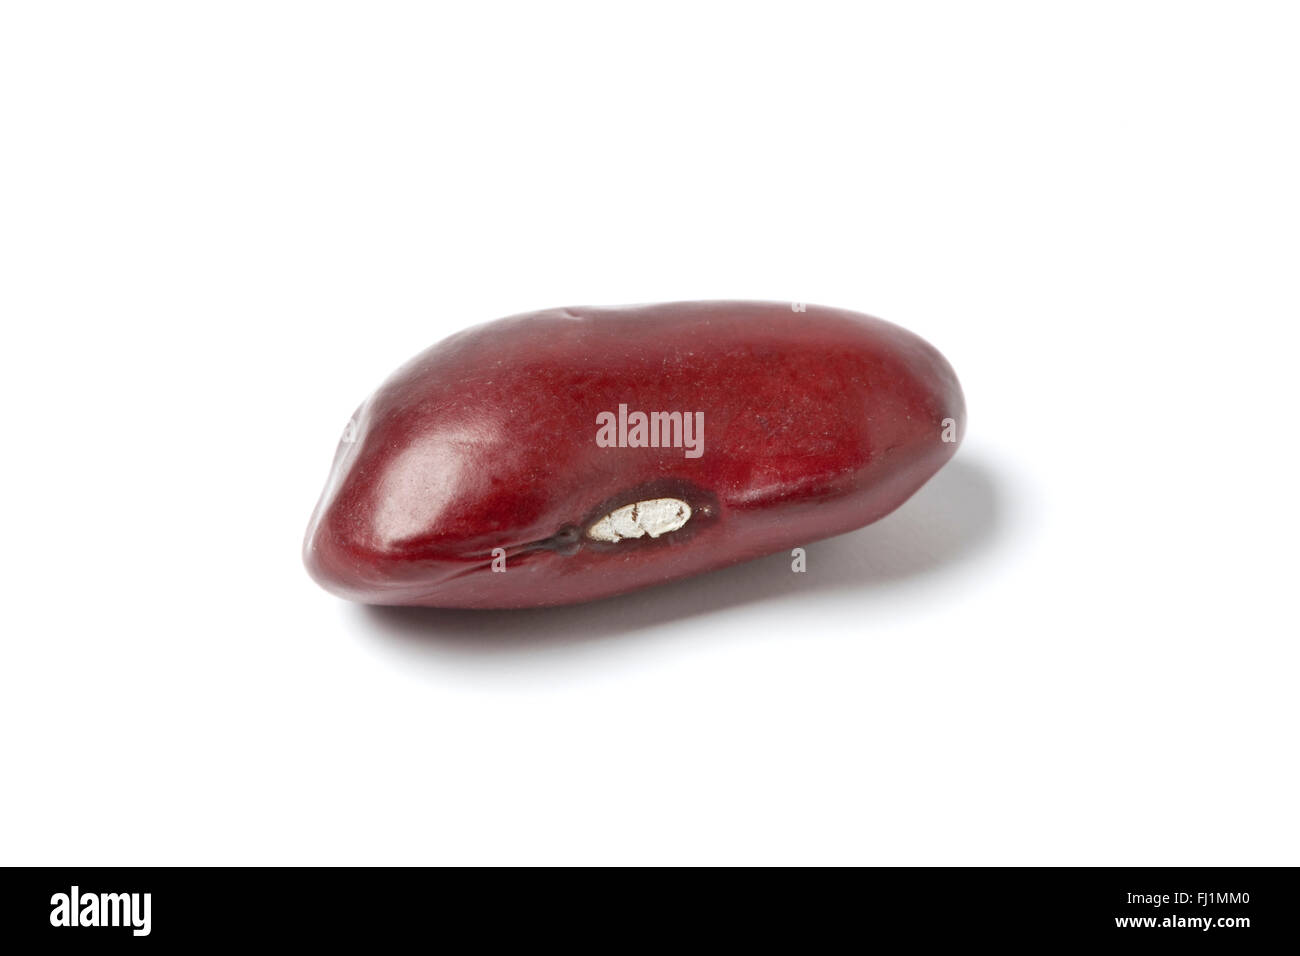 One whole single Red kidney bean on white background Stock Photo